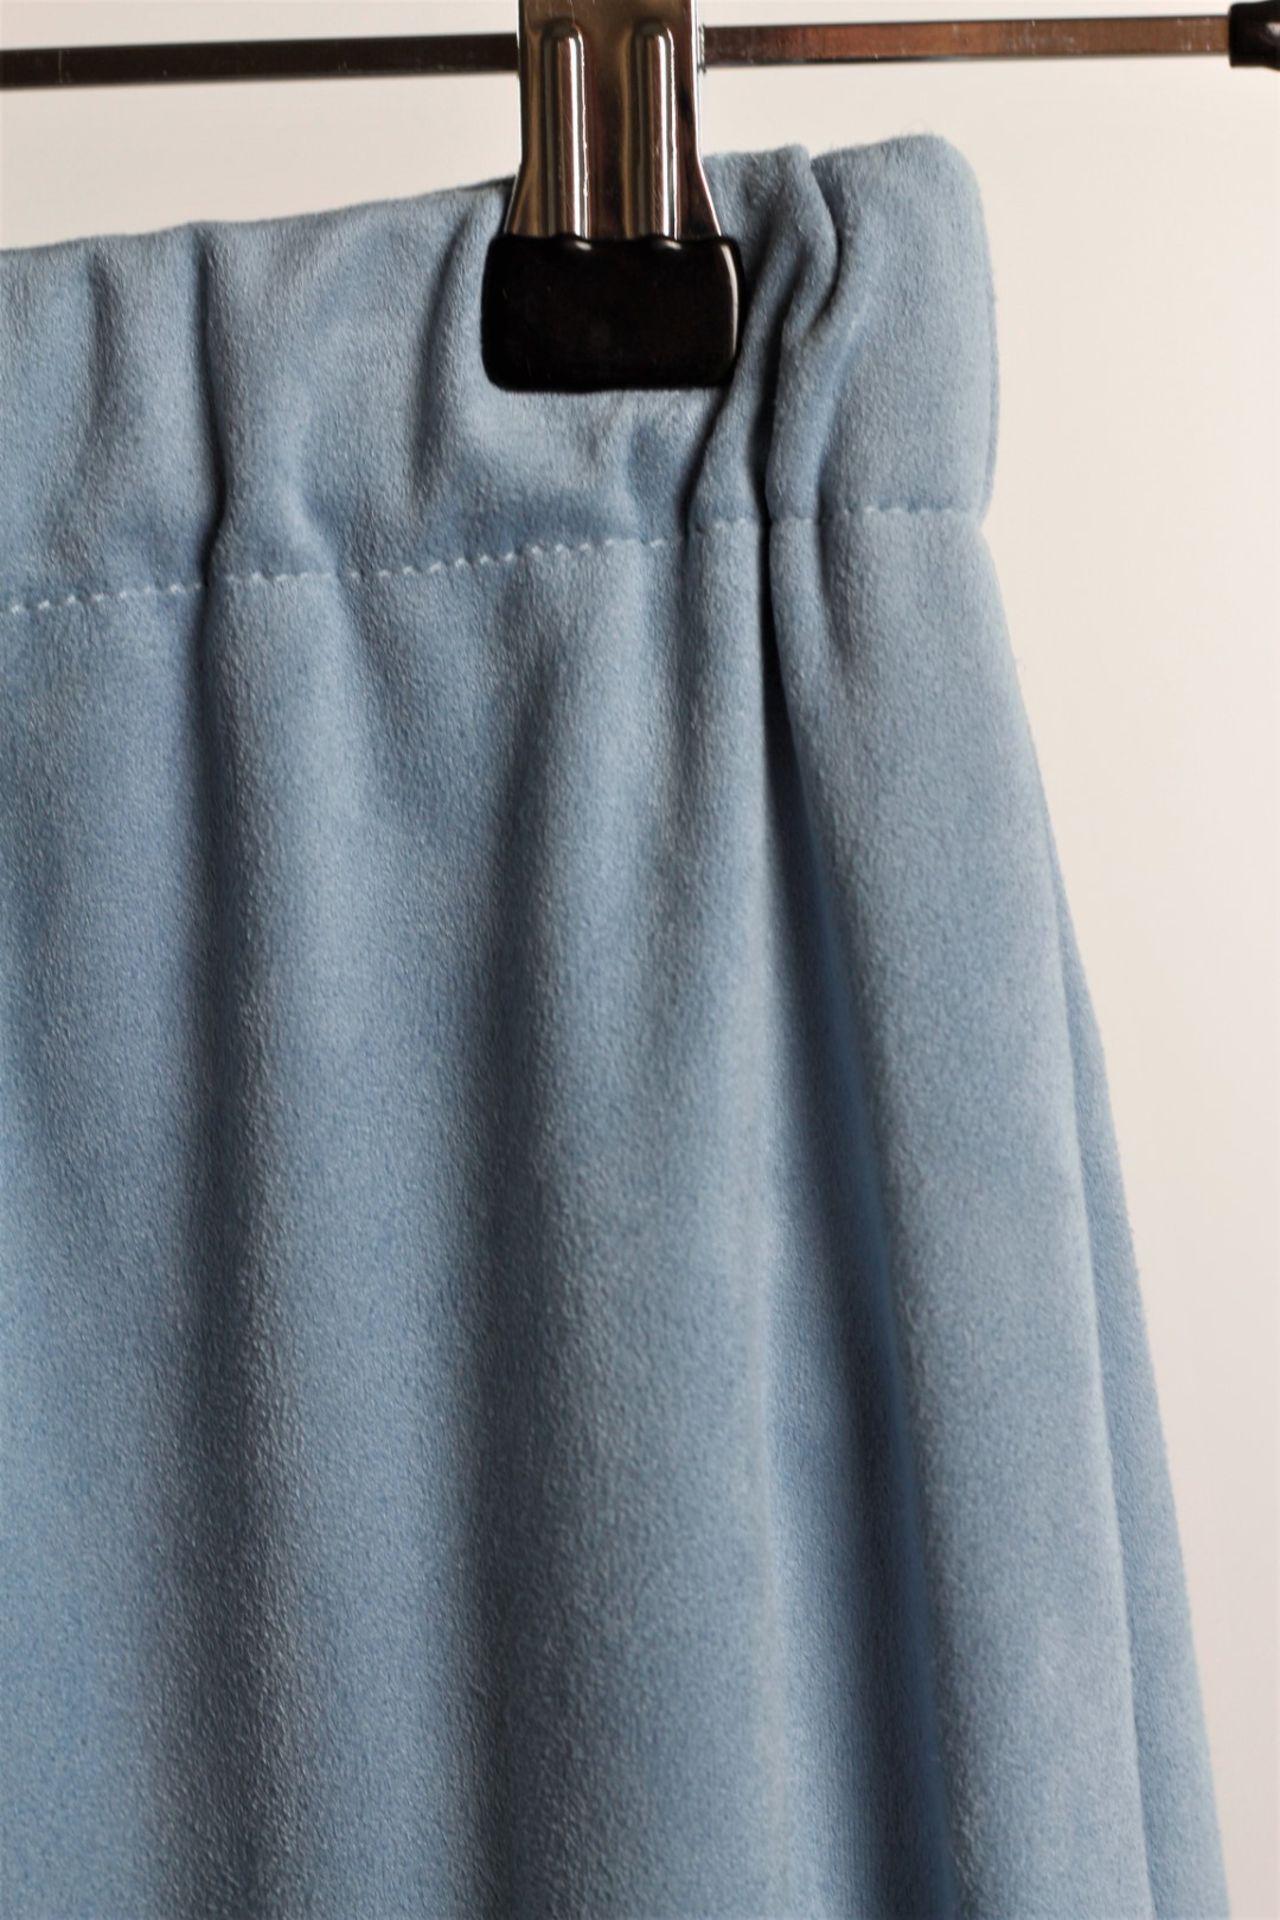 1 x Boutique Le Duc Baby Blue Skirt - From a High End Clothing Boutique In The - Image 6 of 7